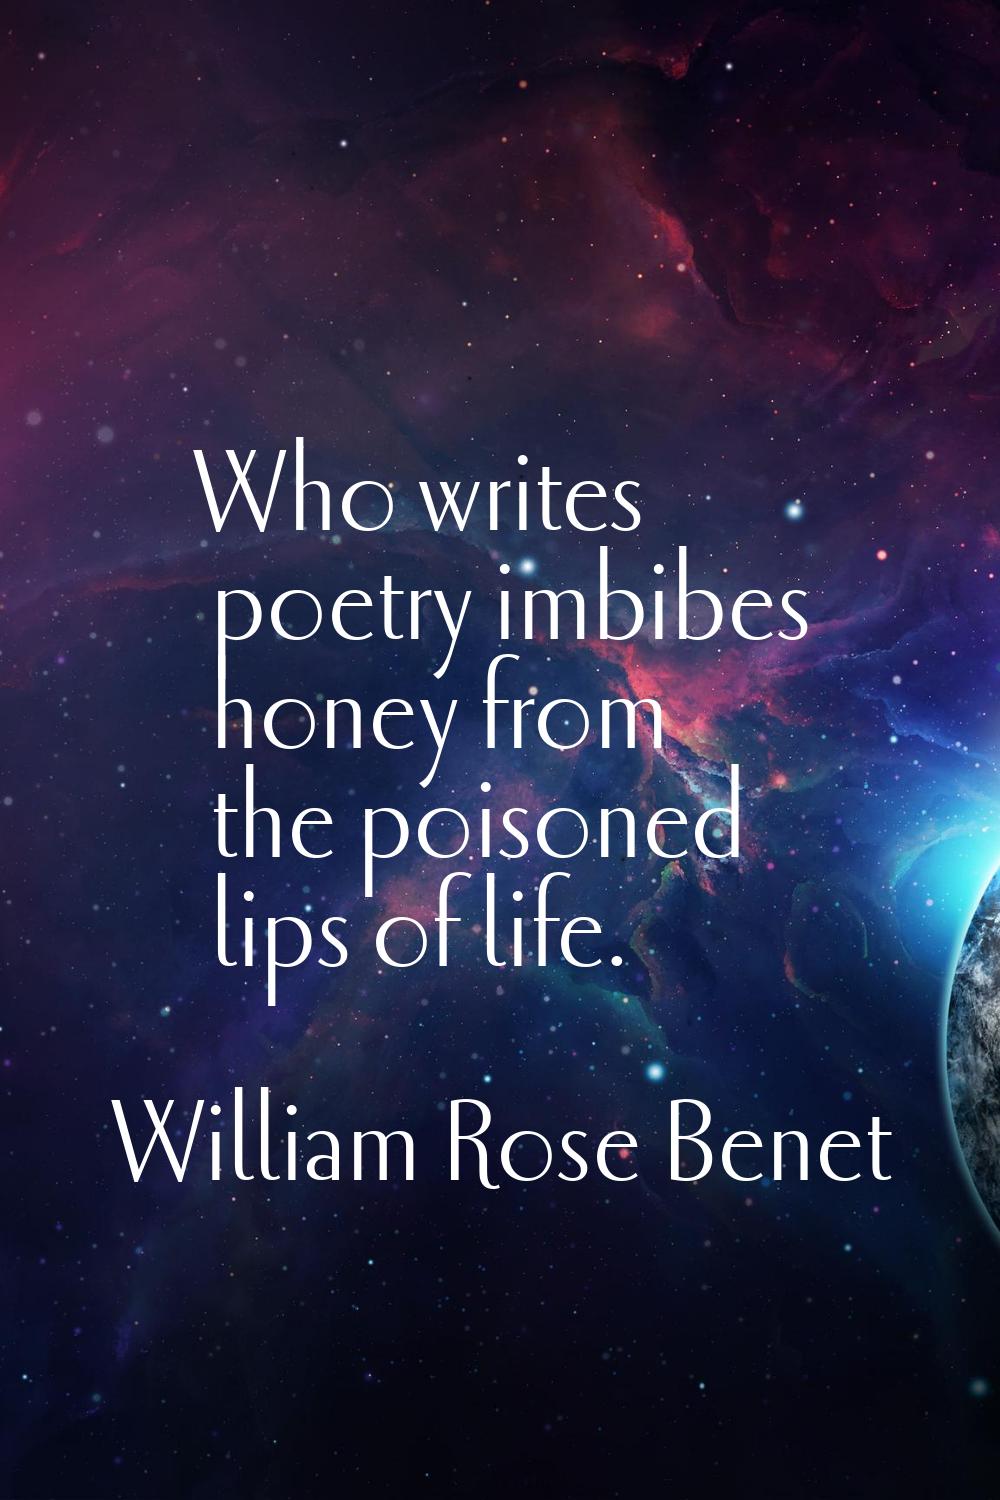 Who writes poetry imbibes honey from the poisoned lips of life.